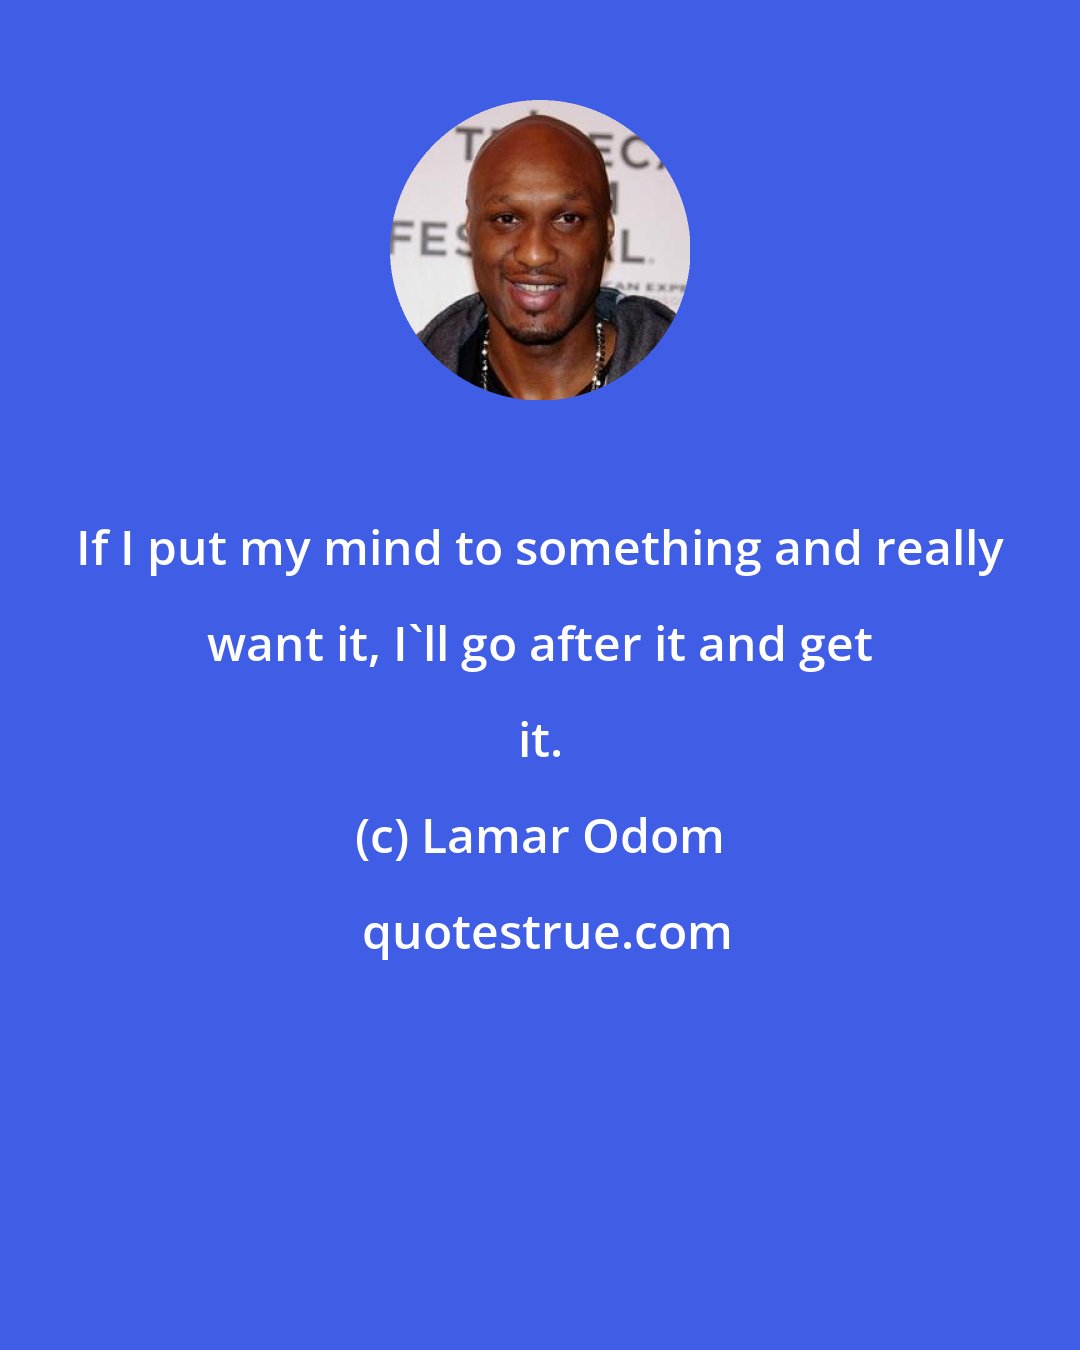 Lamar Odom: If I put my mind to something and really want it, I'll go after it and get it.